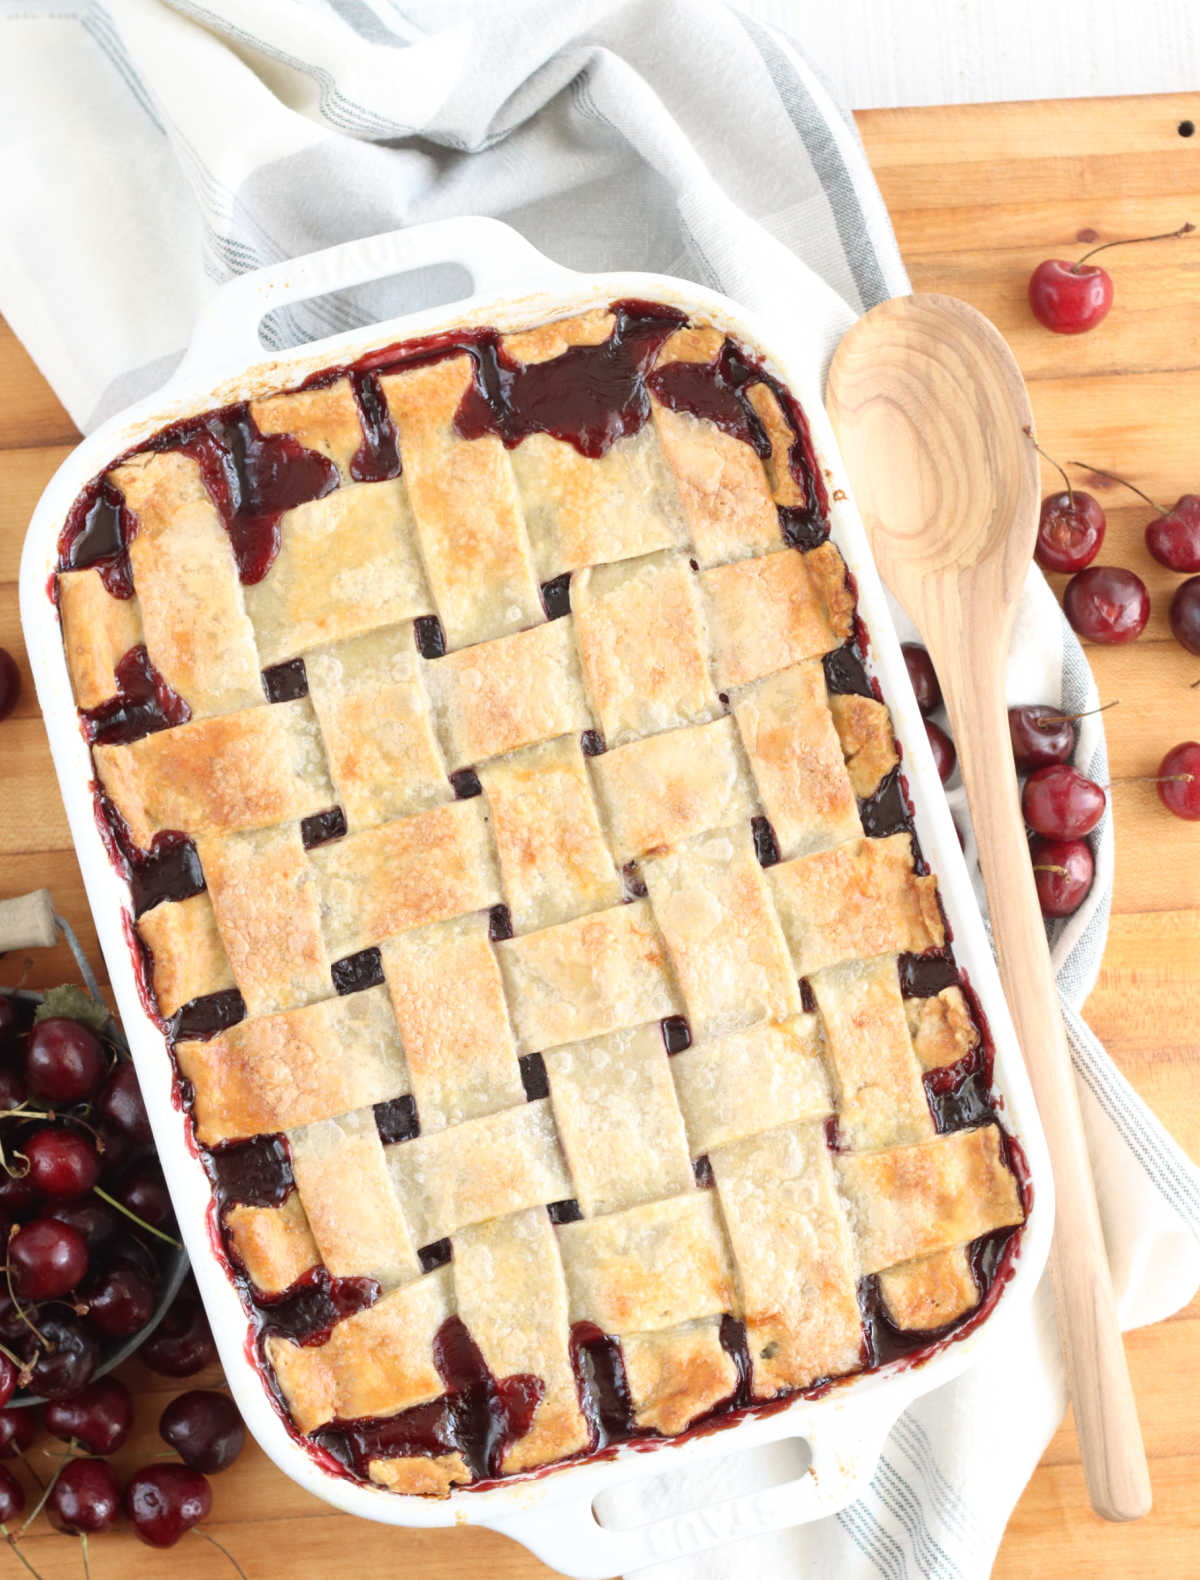 Cobbler with pie crust lattice weaved in white rectangle baking dish on wooden cutting board, fresh cherries to left, wooden spoon on right.